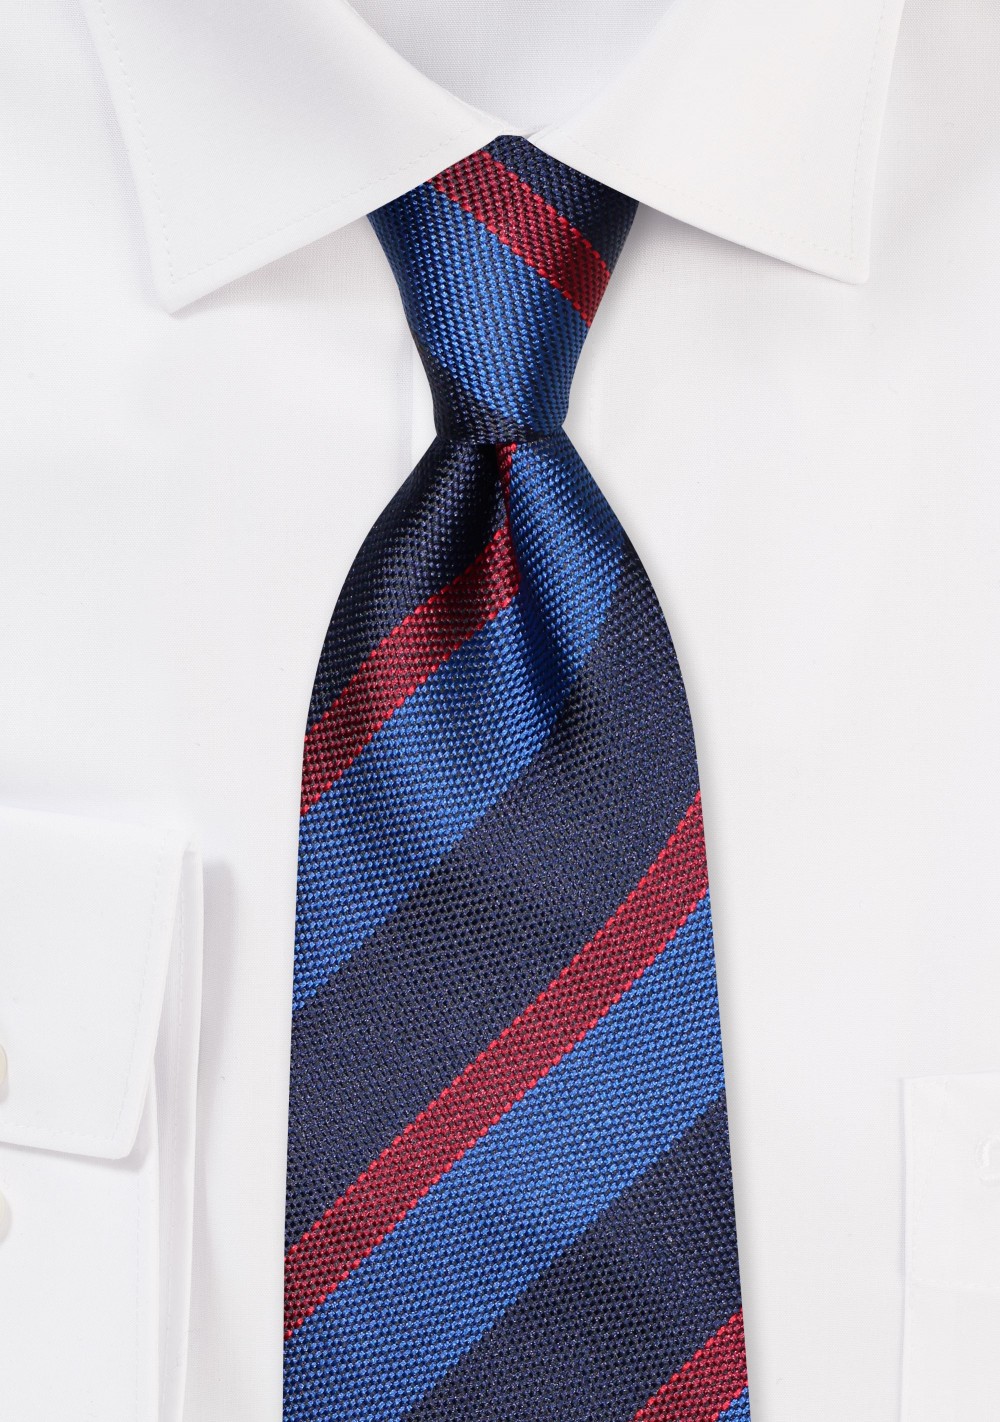 Grenadine Textured Striped Tie in Blue and Cherry Red